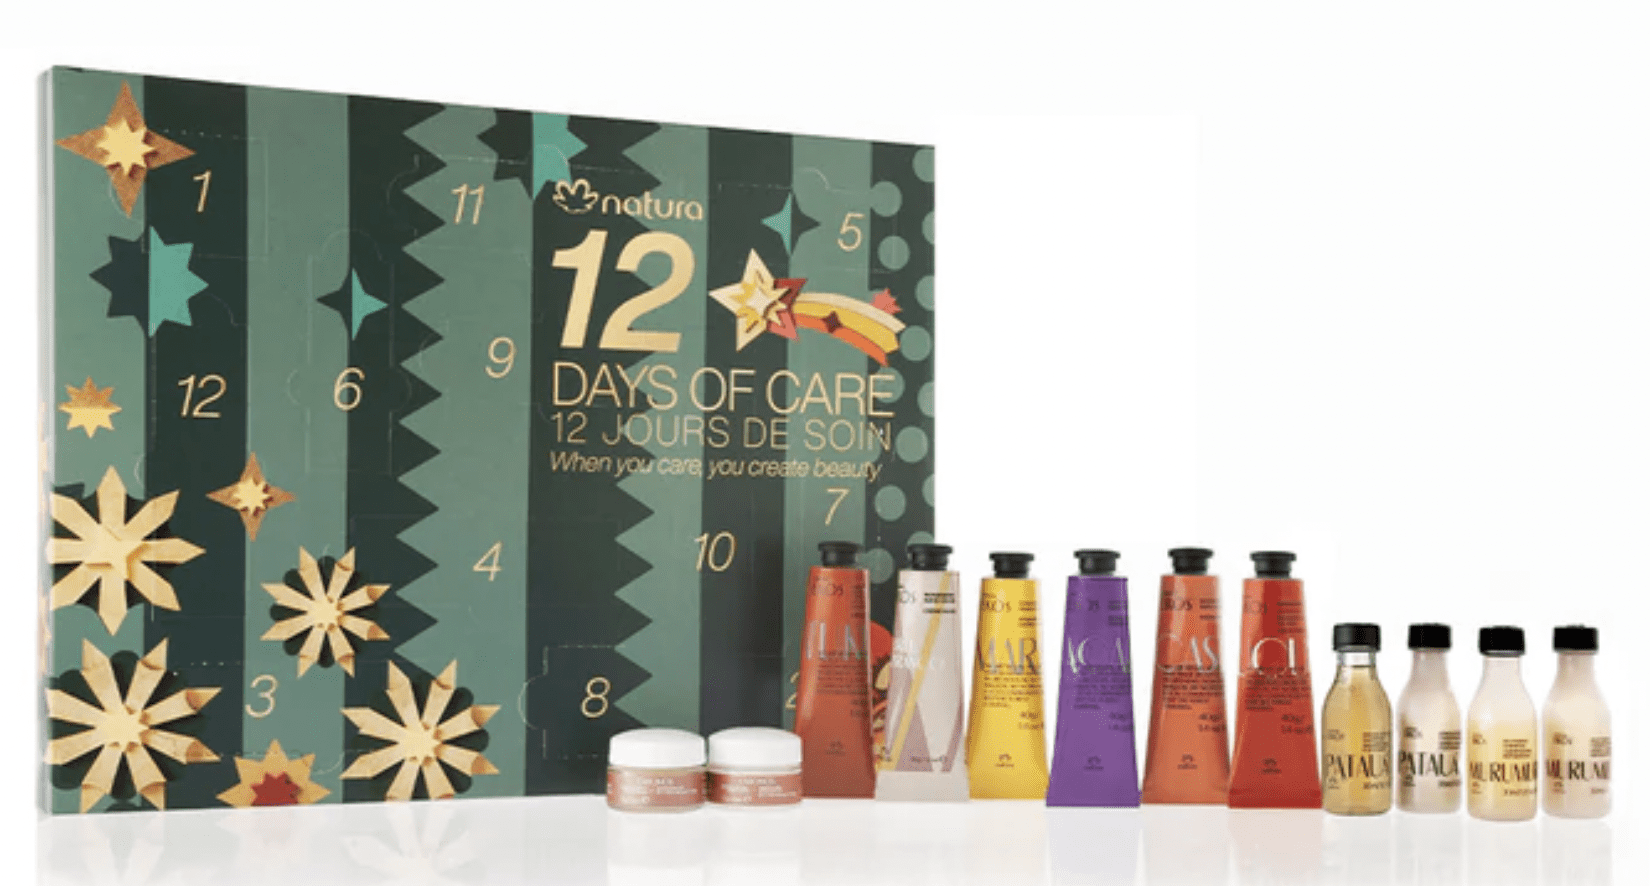 12 Days of Care by Natura on Clearance!